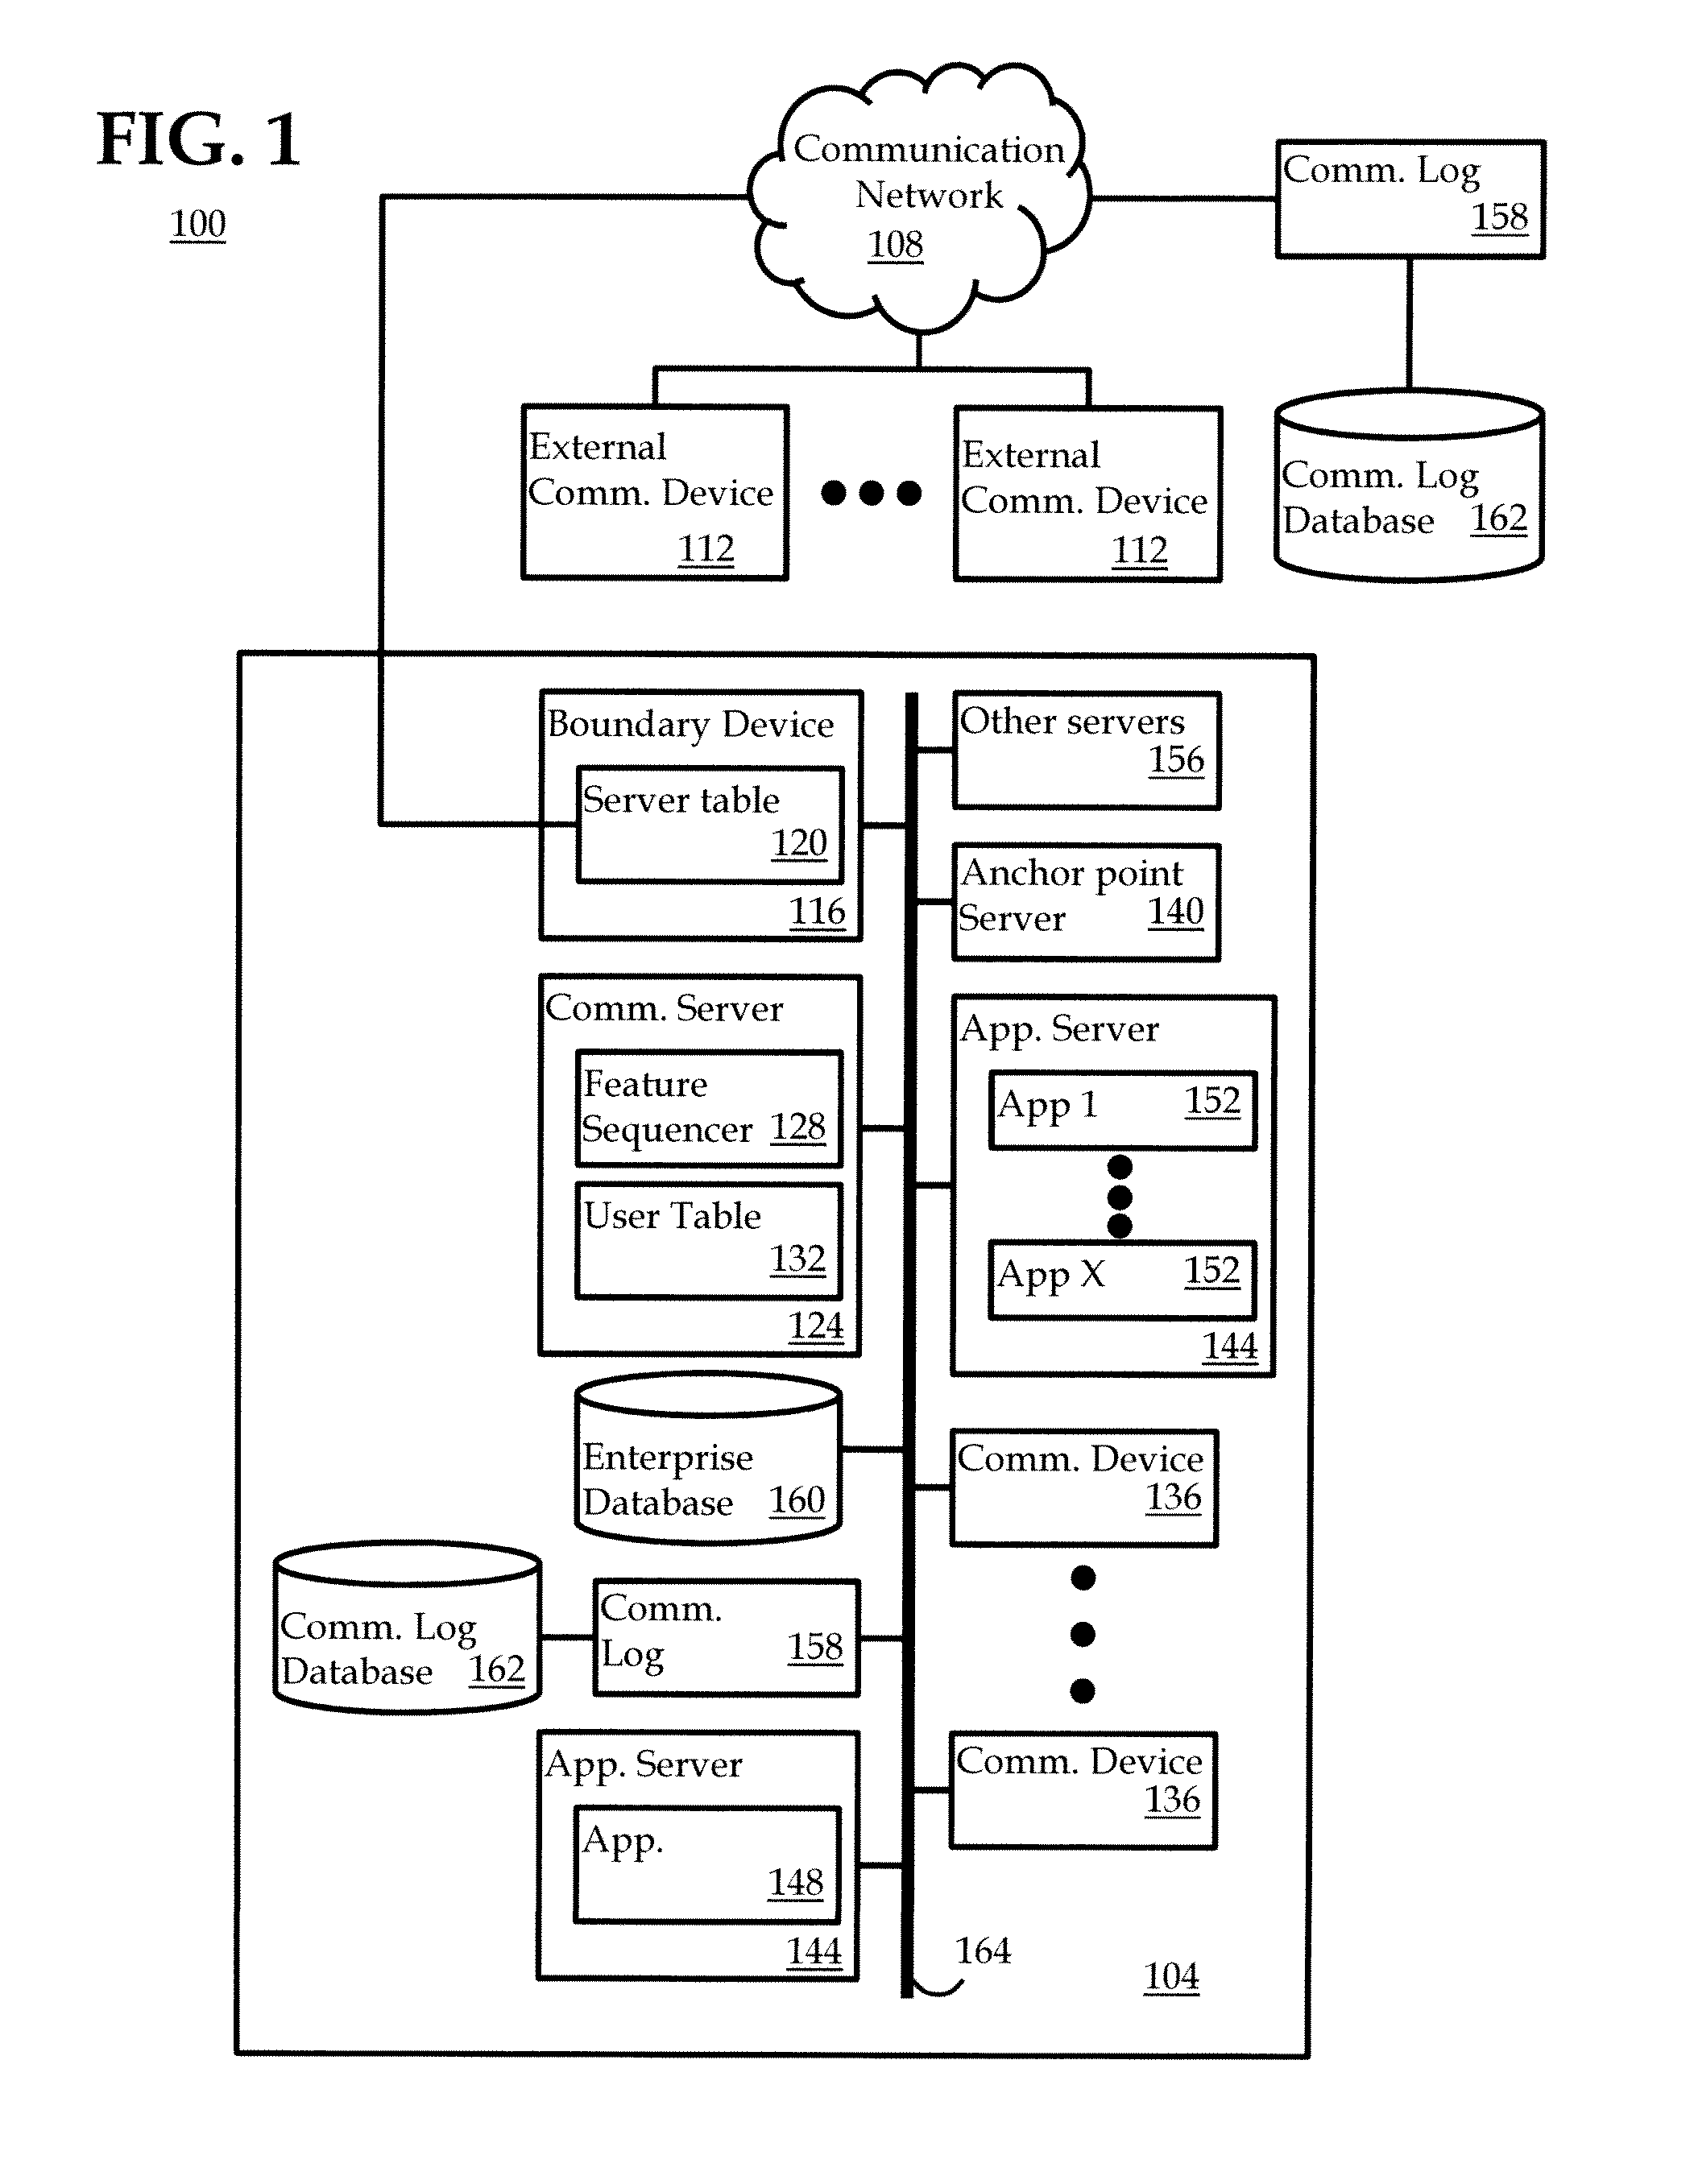 System and method for measuring video quality degradation using face detection